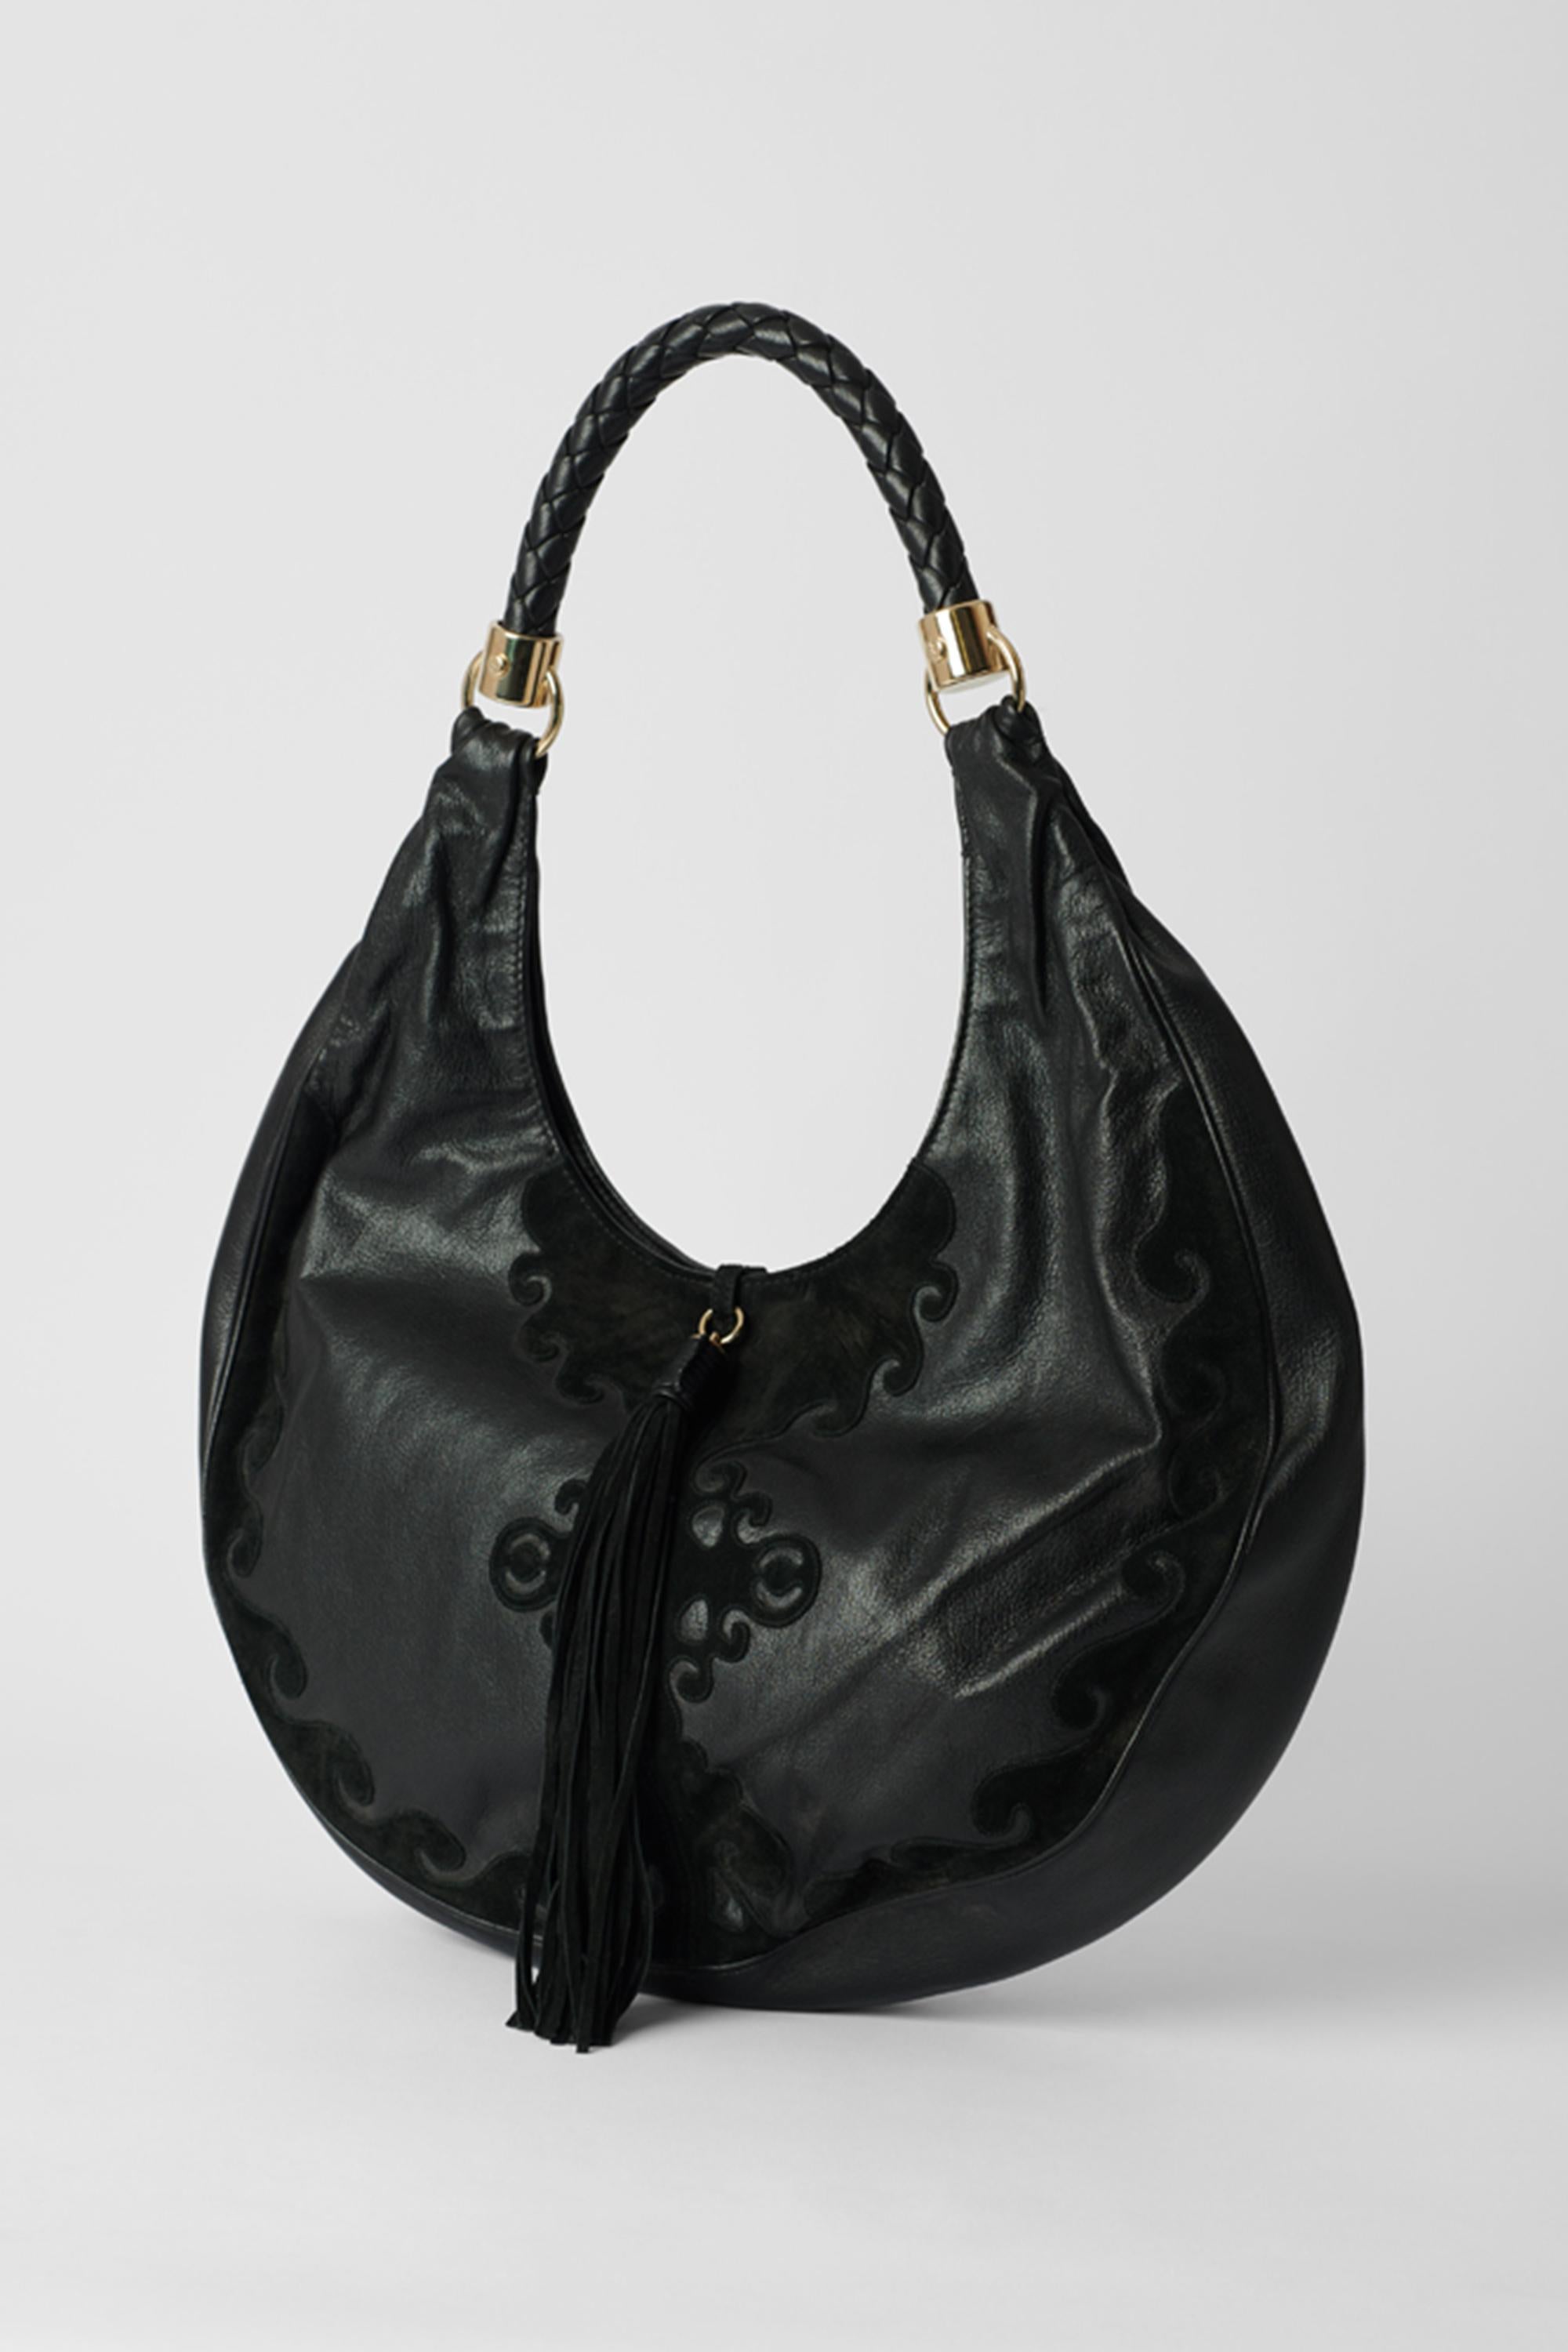 YSL By Tom Ford black leather hobo bag with tassel. Features suede detailing, rope handle with gold hardware, black suede tassel closure and inner back zip. In excellent vintage condition.
Authenticity Guaranteed.

Fabric: Leather
Dustbag: No
Serial